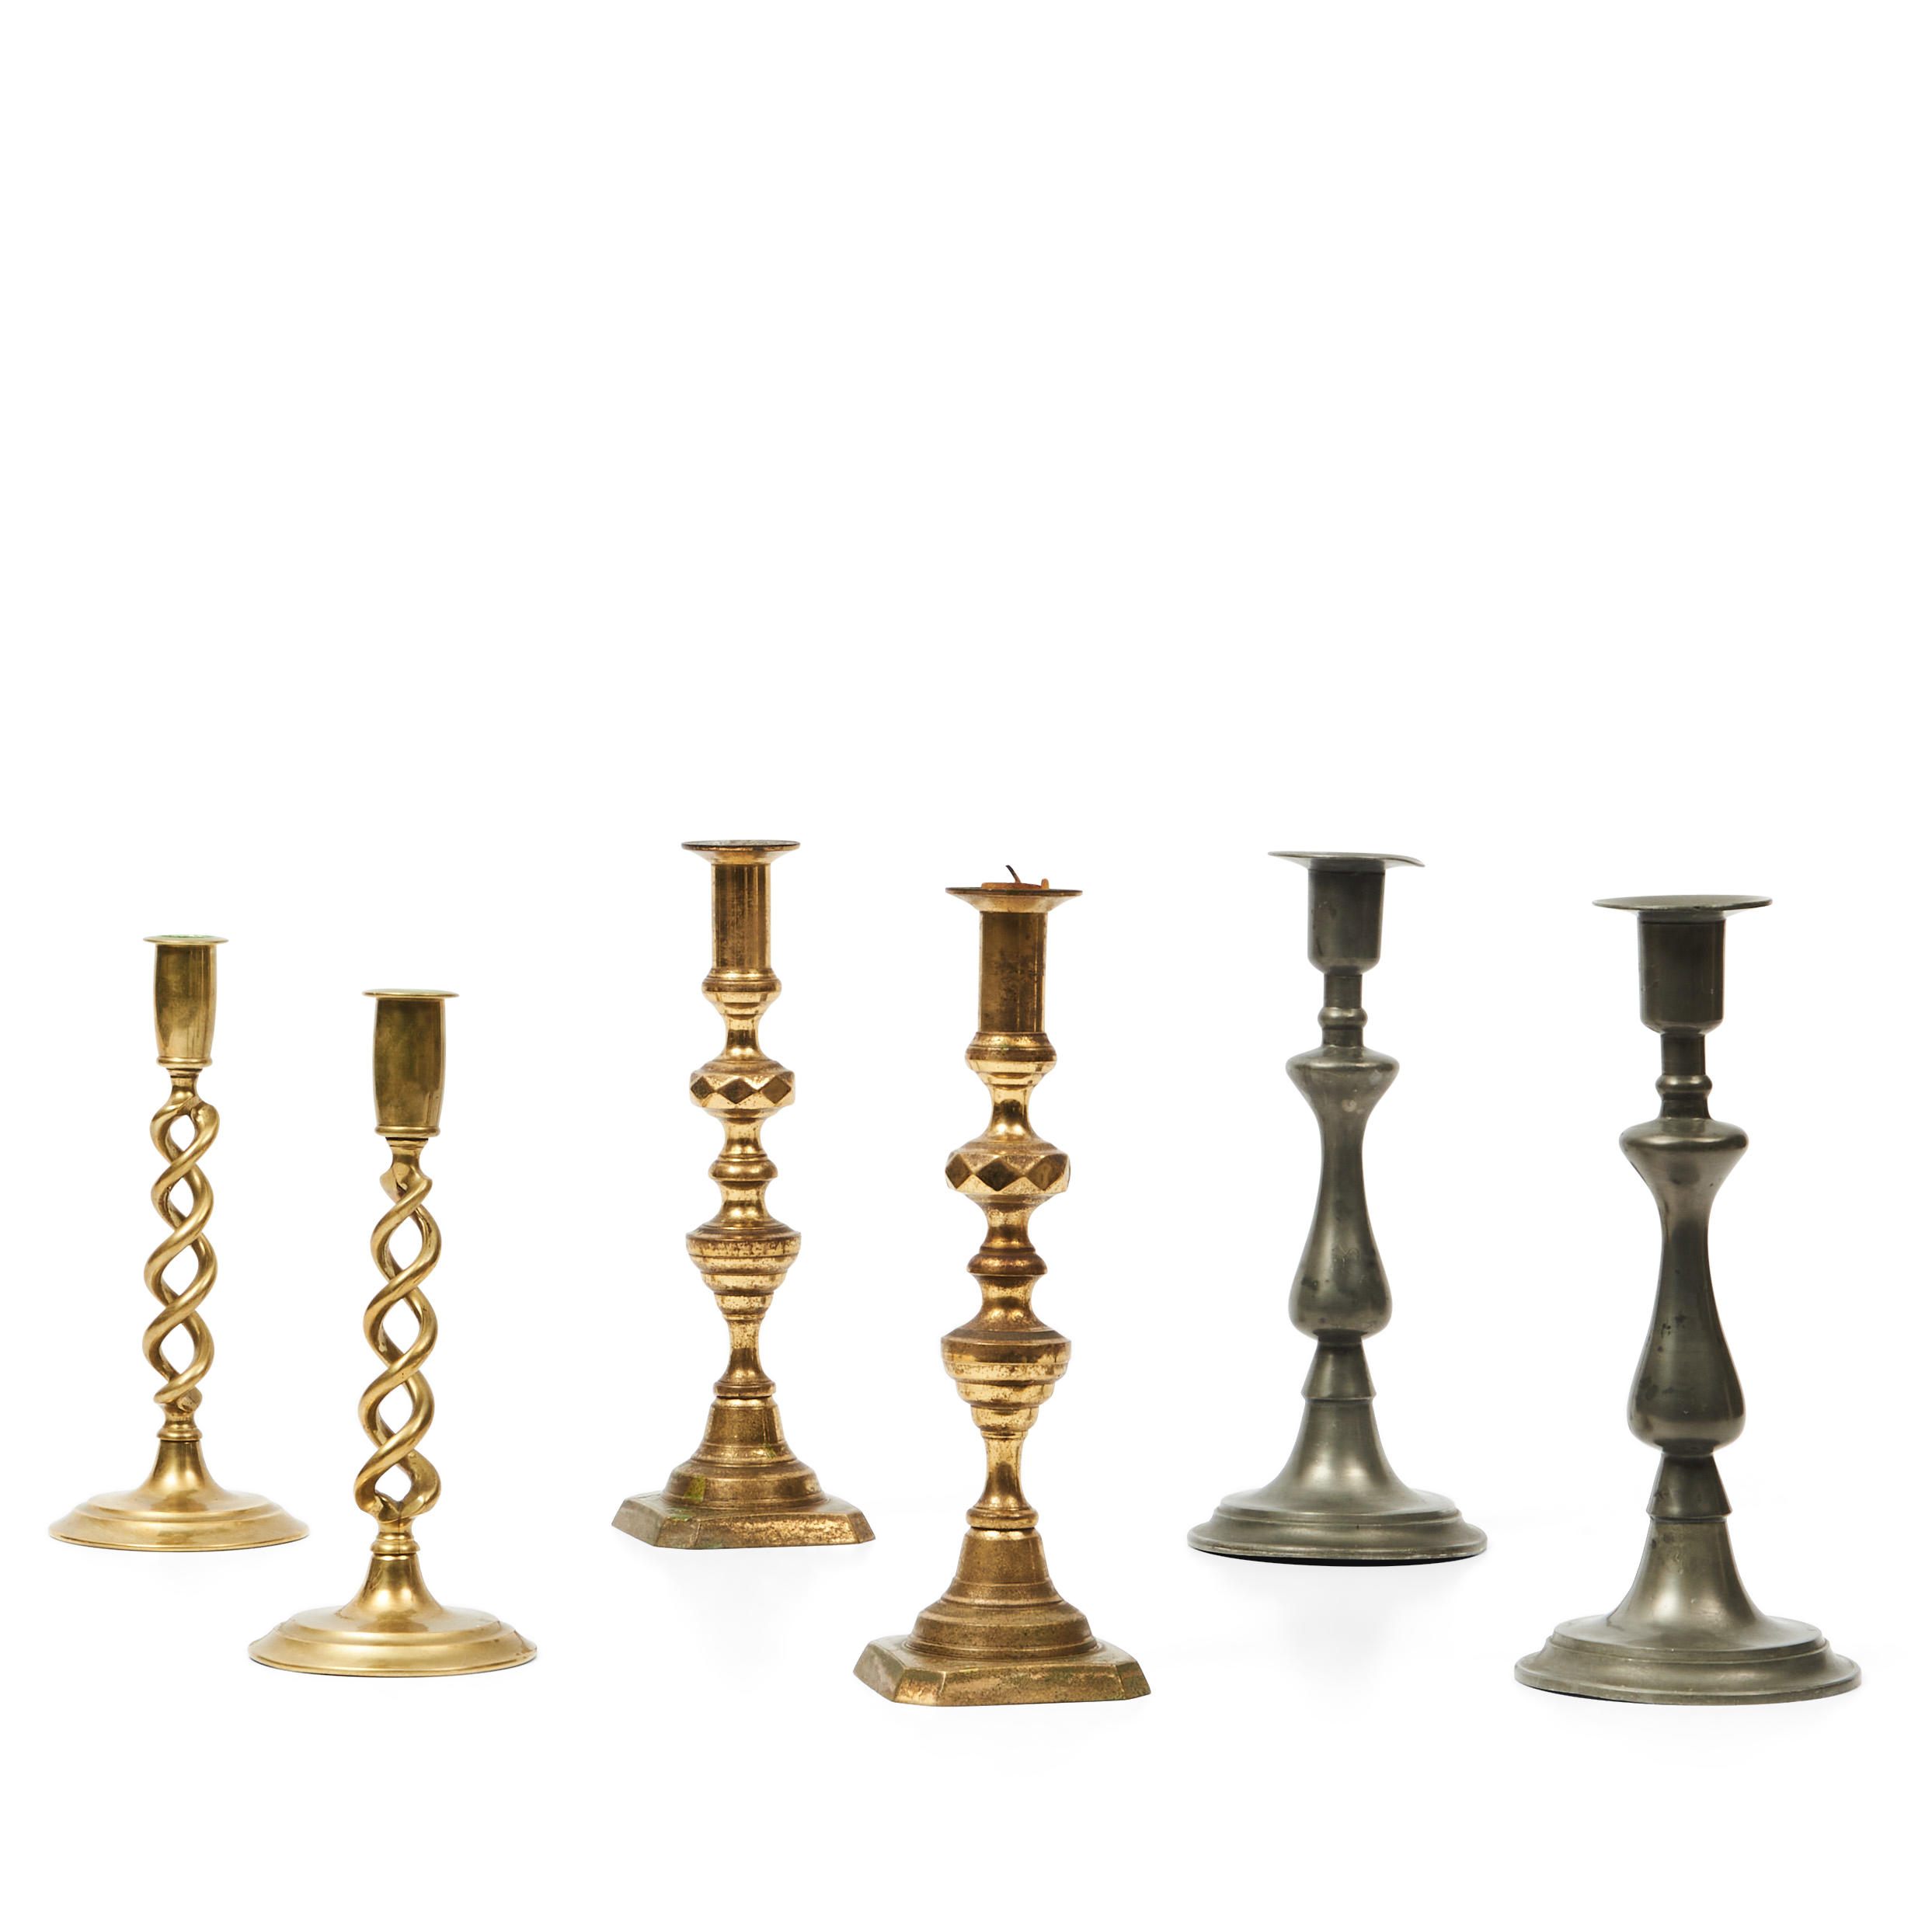 SIX BRASS AND PEWTER CANDLESTICKS